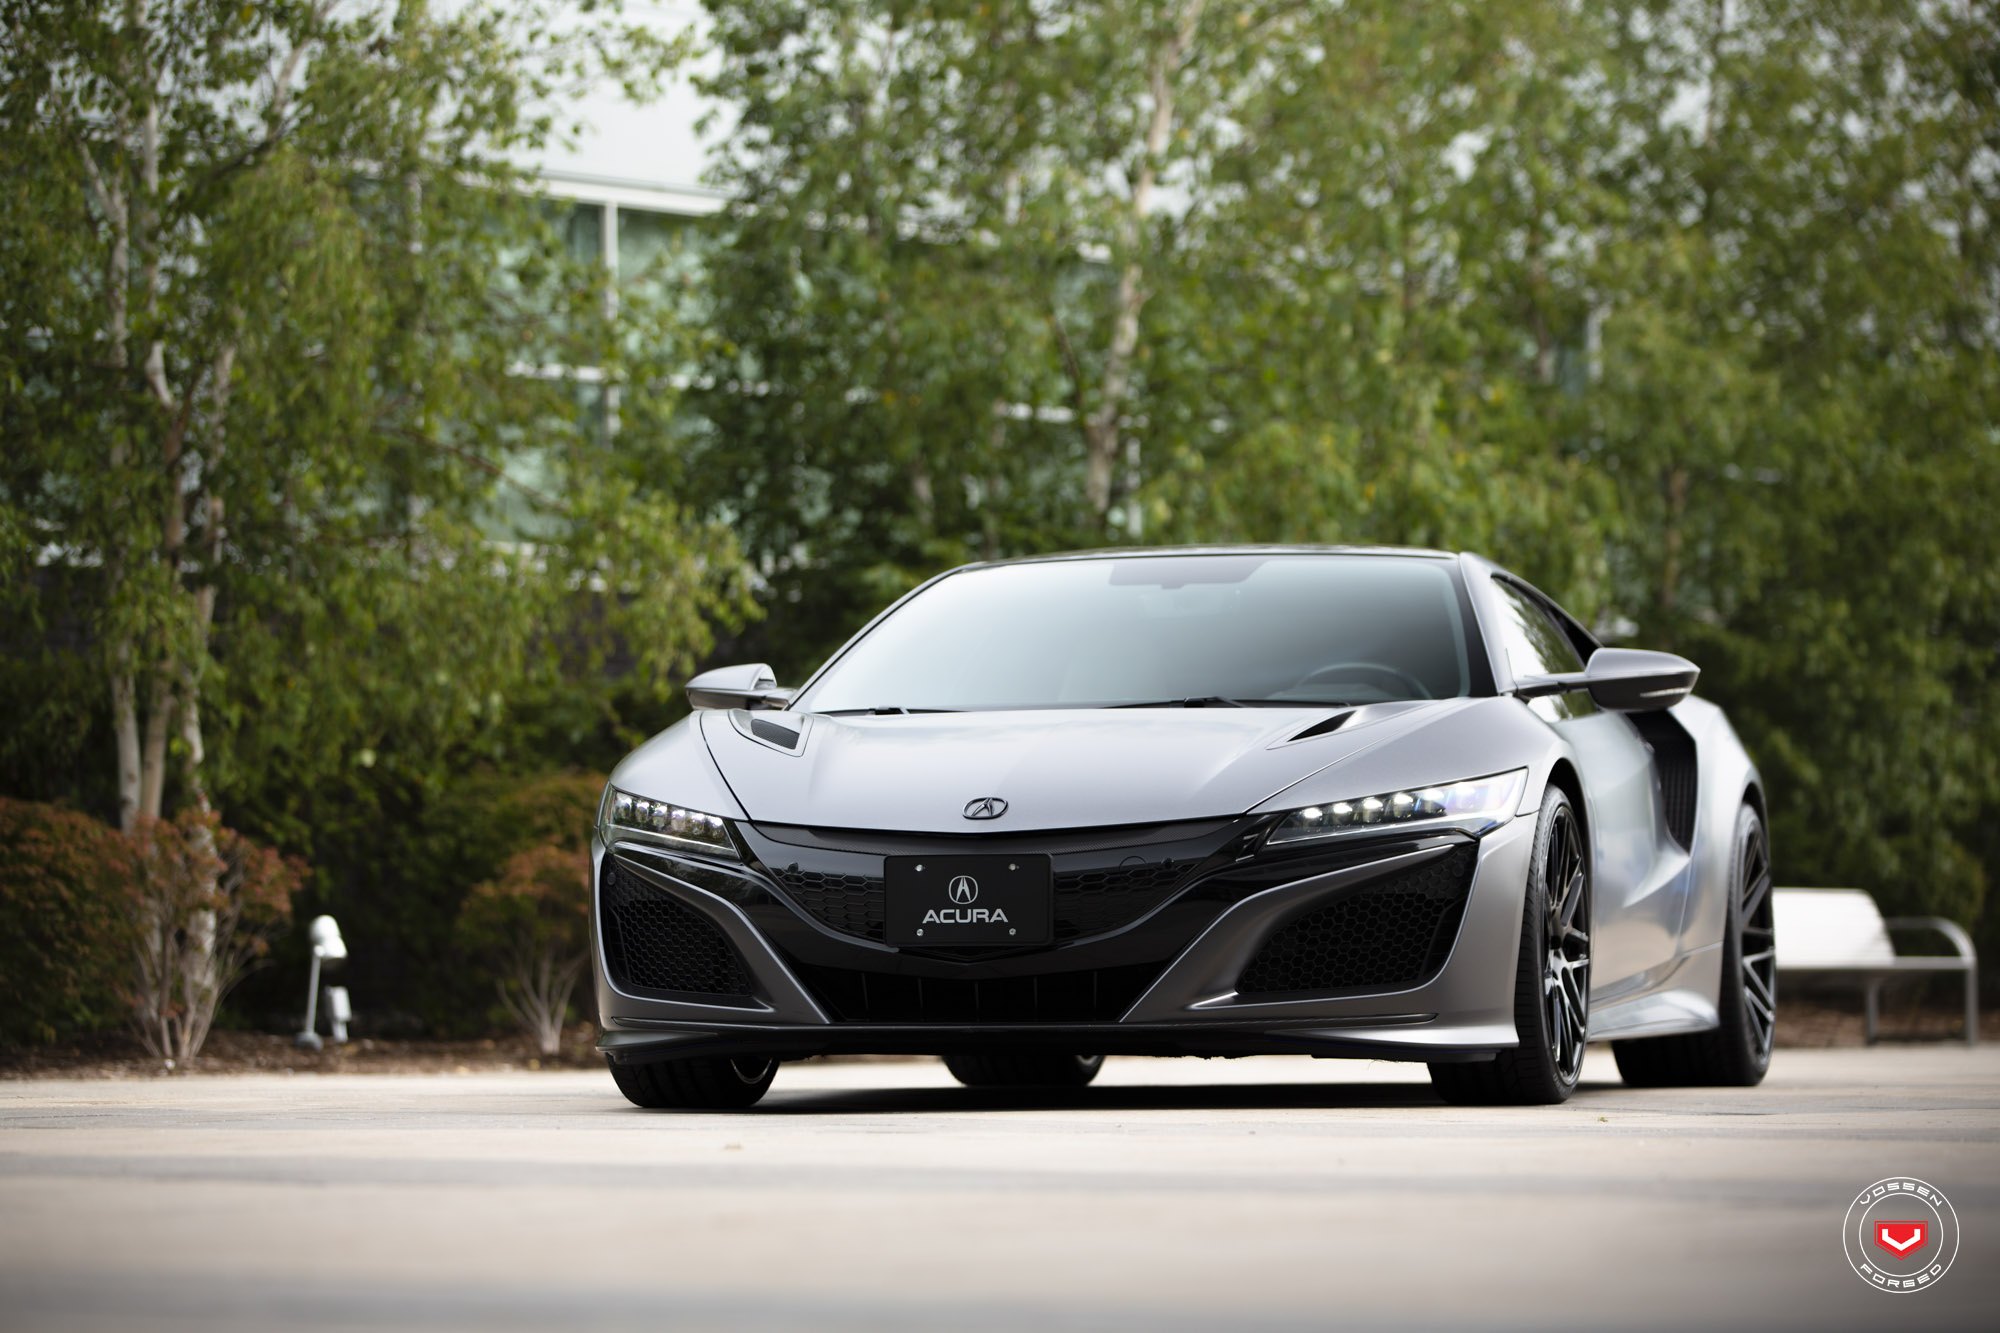 Custom Front Bumper on Gray Acura NSX - Photo by Vossen